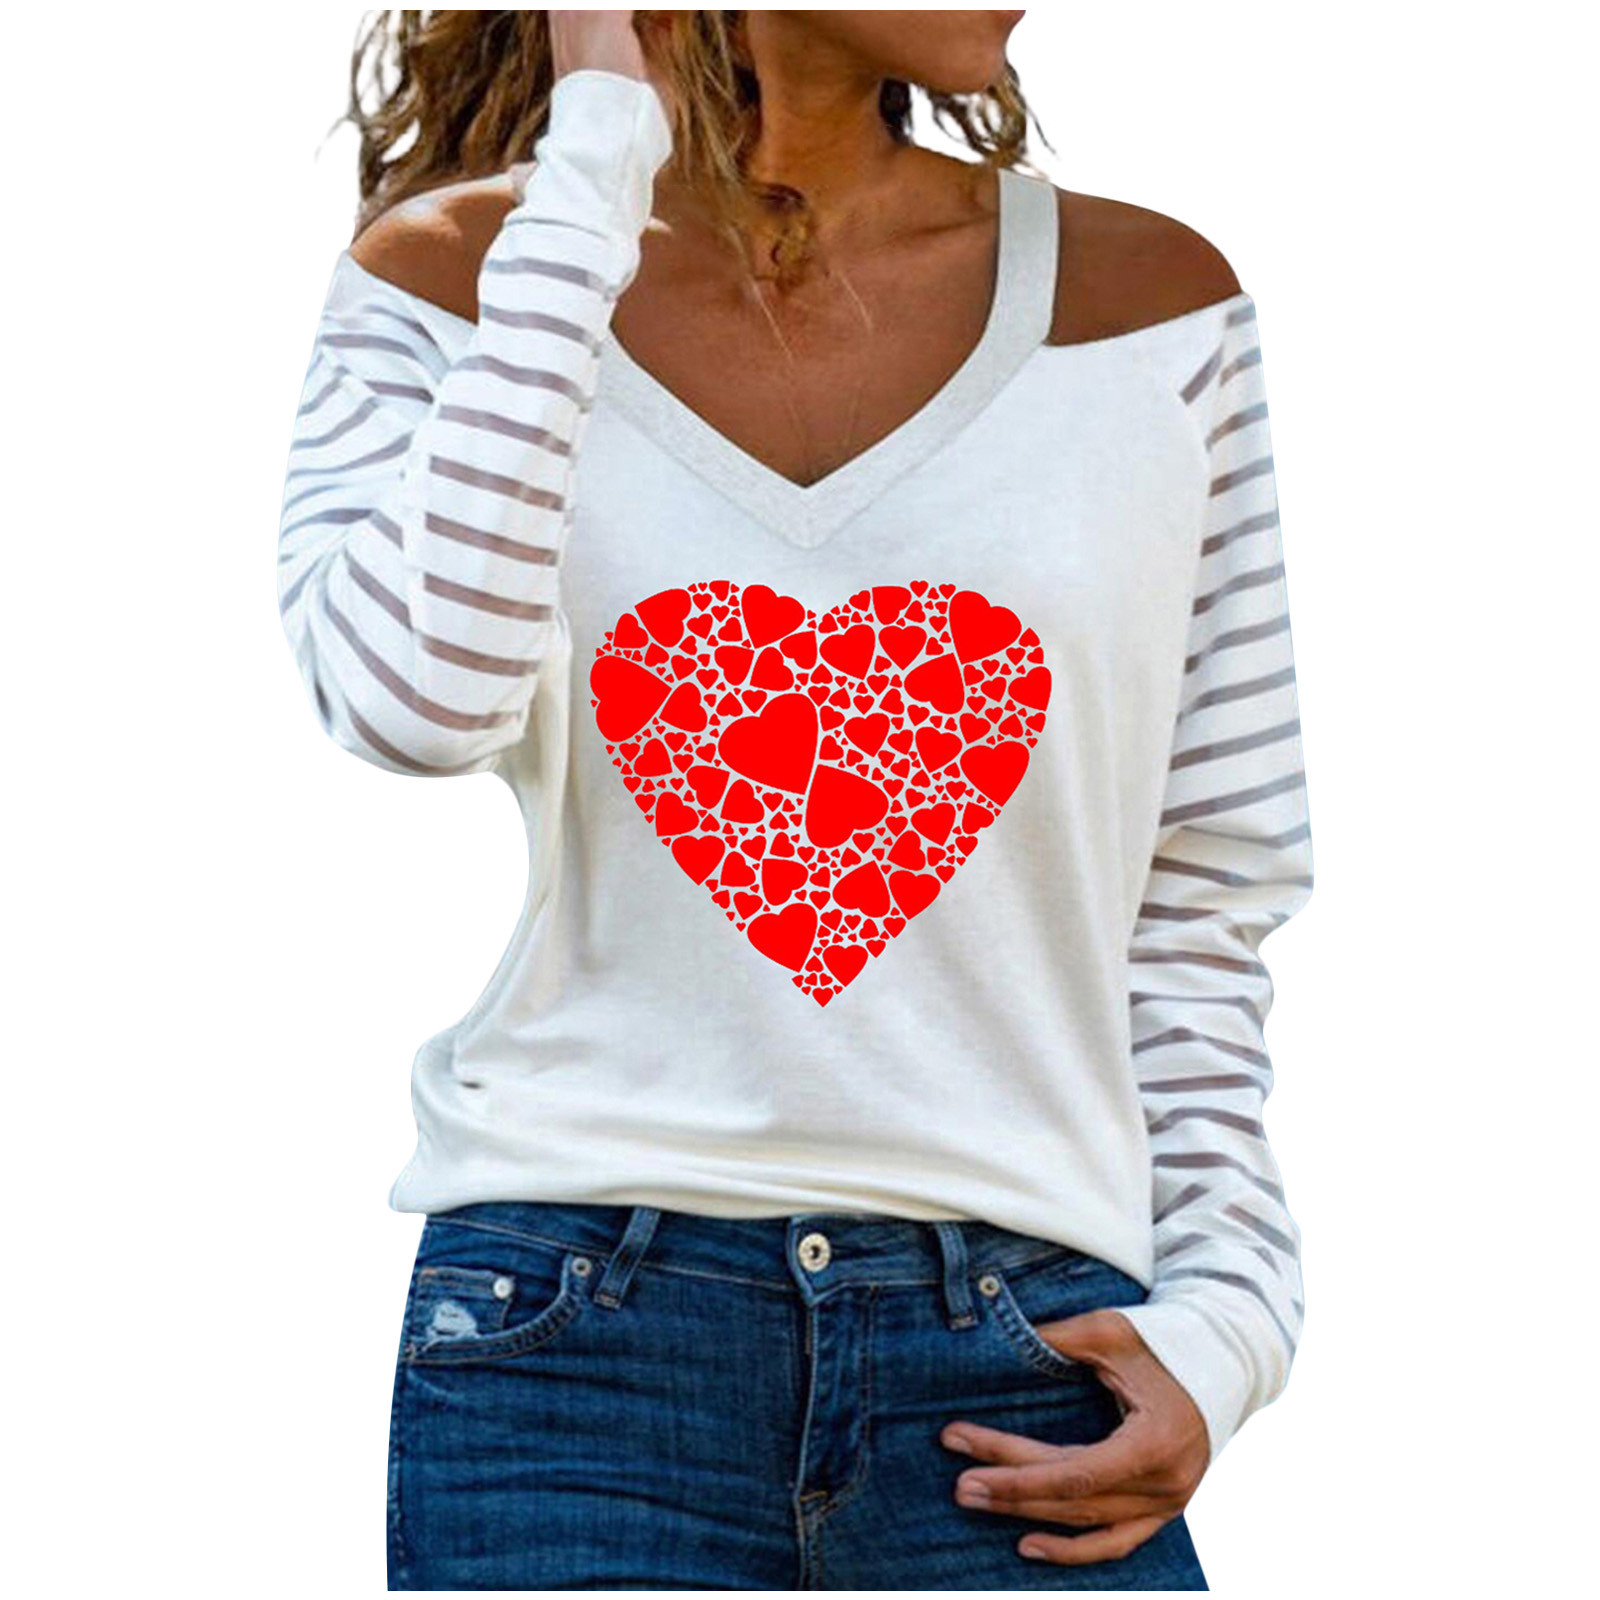 Women Sparkly Heart Shirts Fashion Sweetheart Collar Cold Shoulder Stripe Long Sleeves T-Shirt Pullover Tunic Tops - image 1 of 5